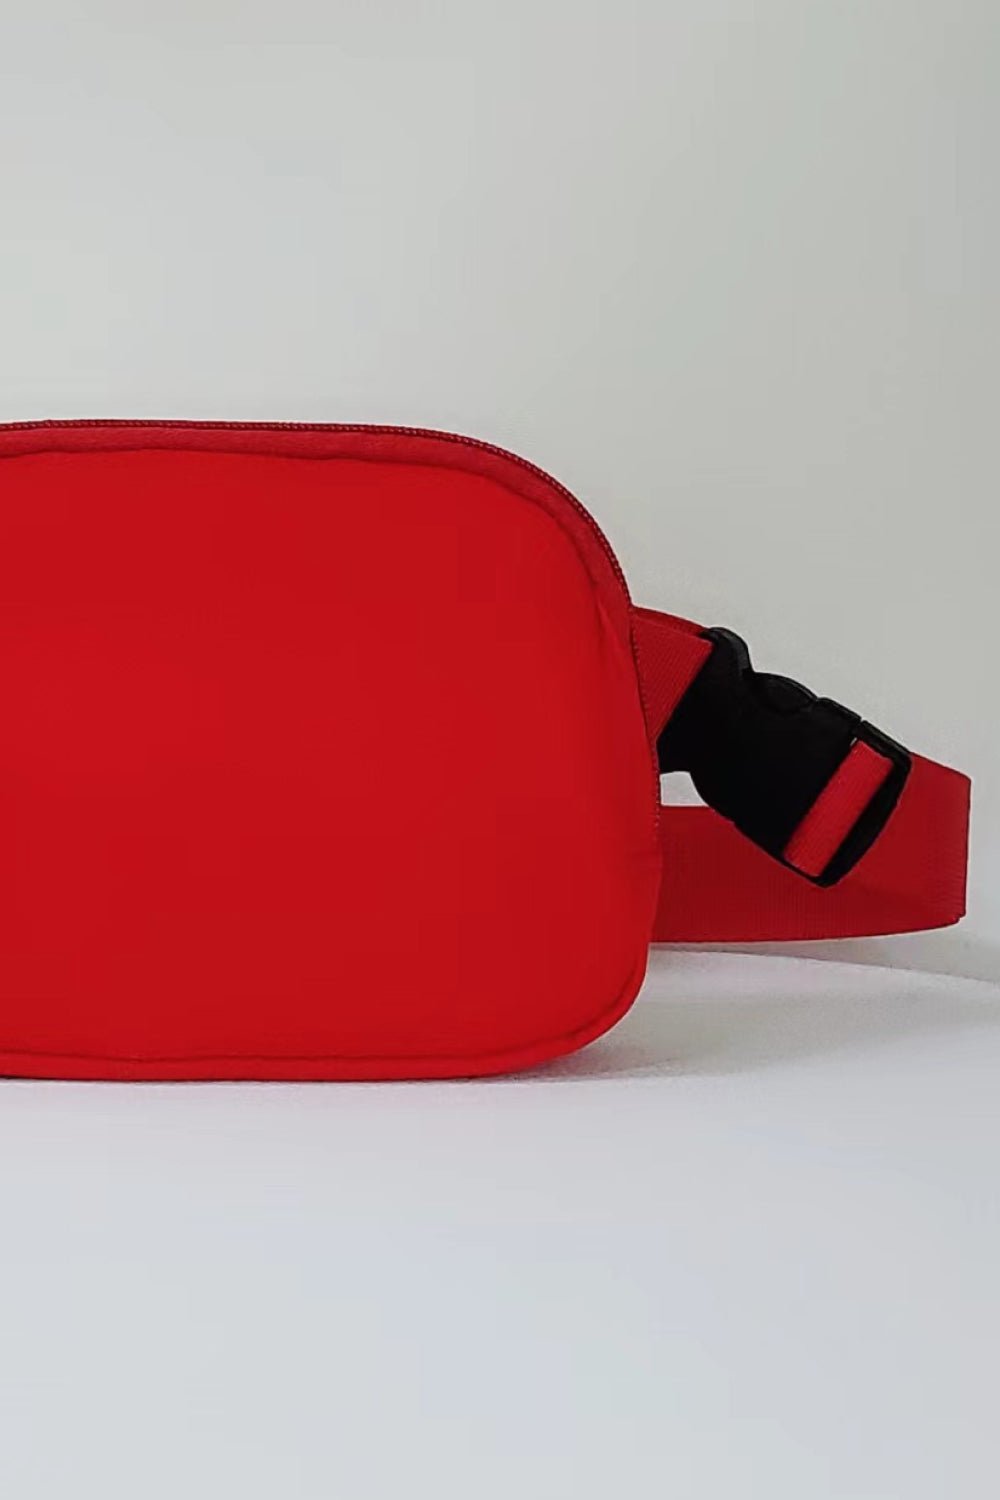 Buckle Zip Closure Fanny Pack - Fashion Girl Online Store